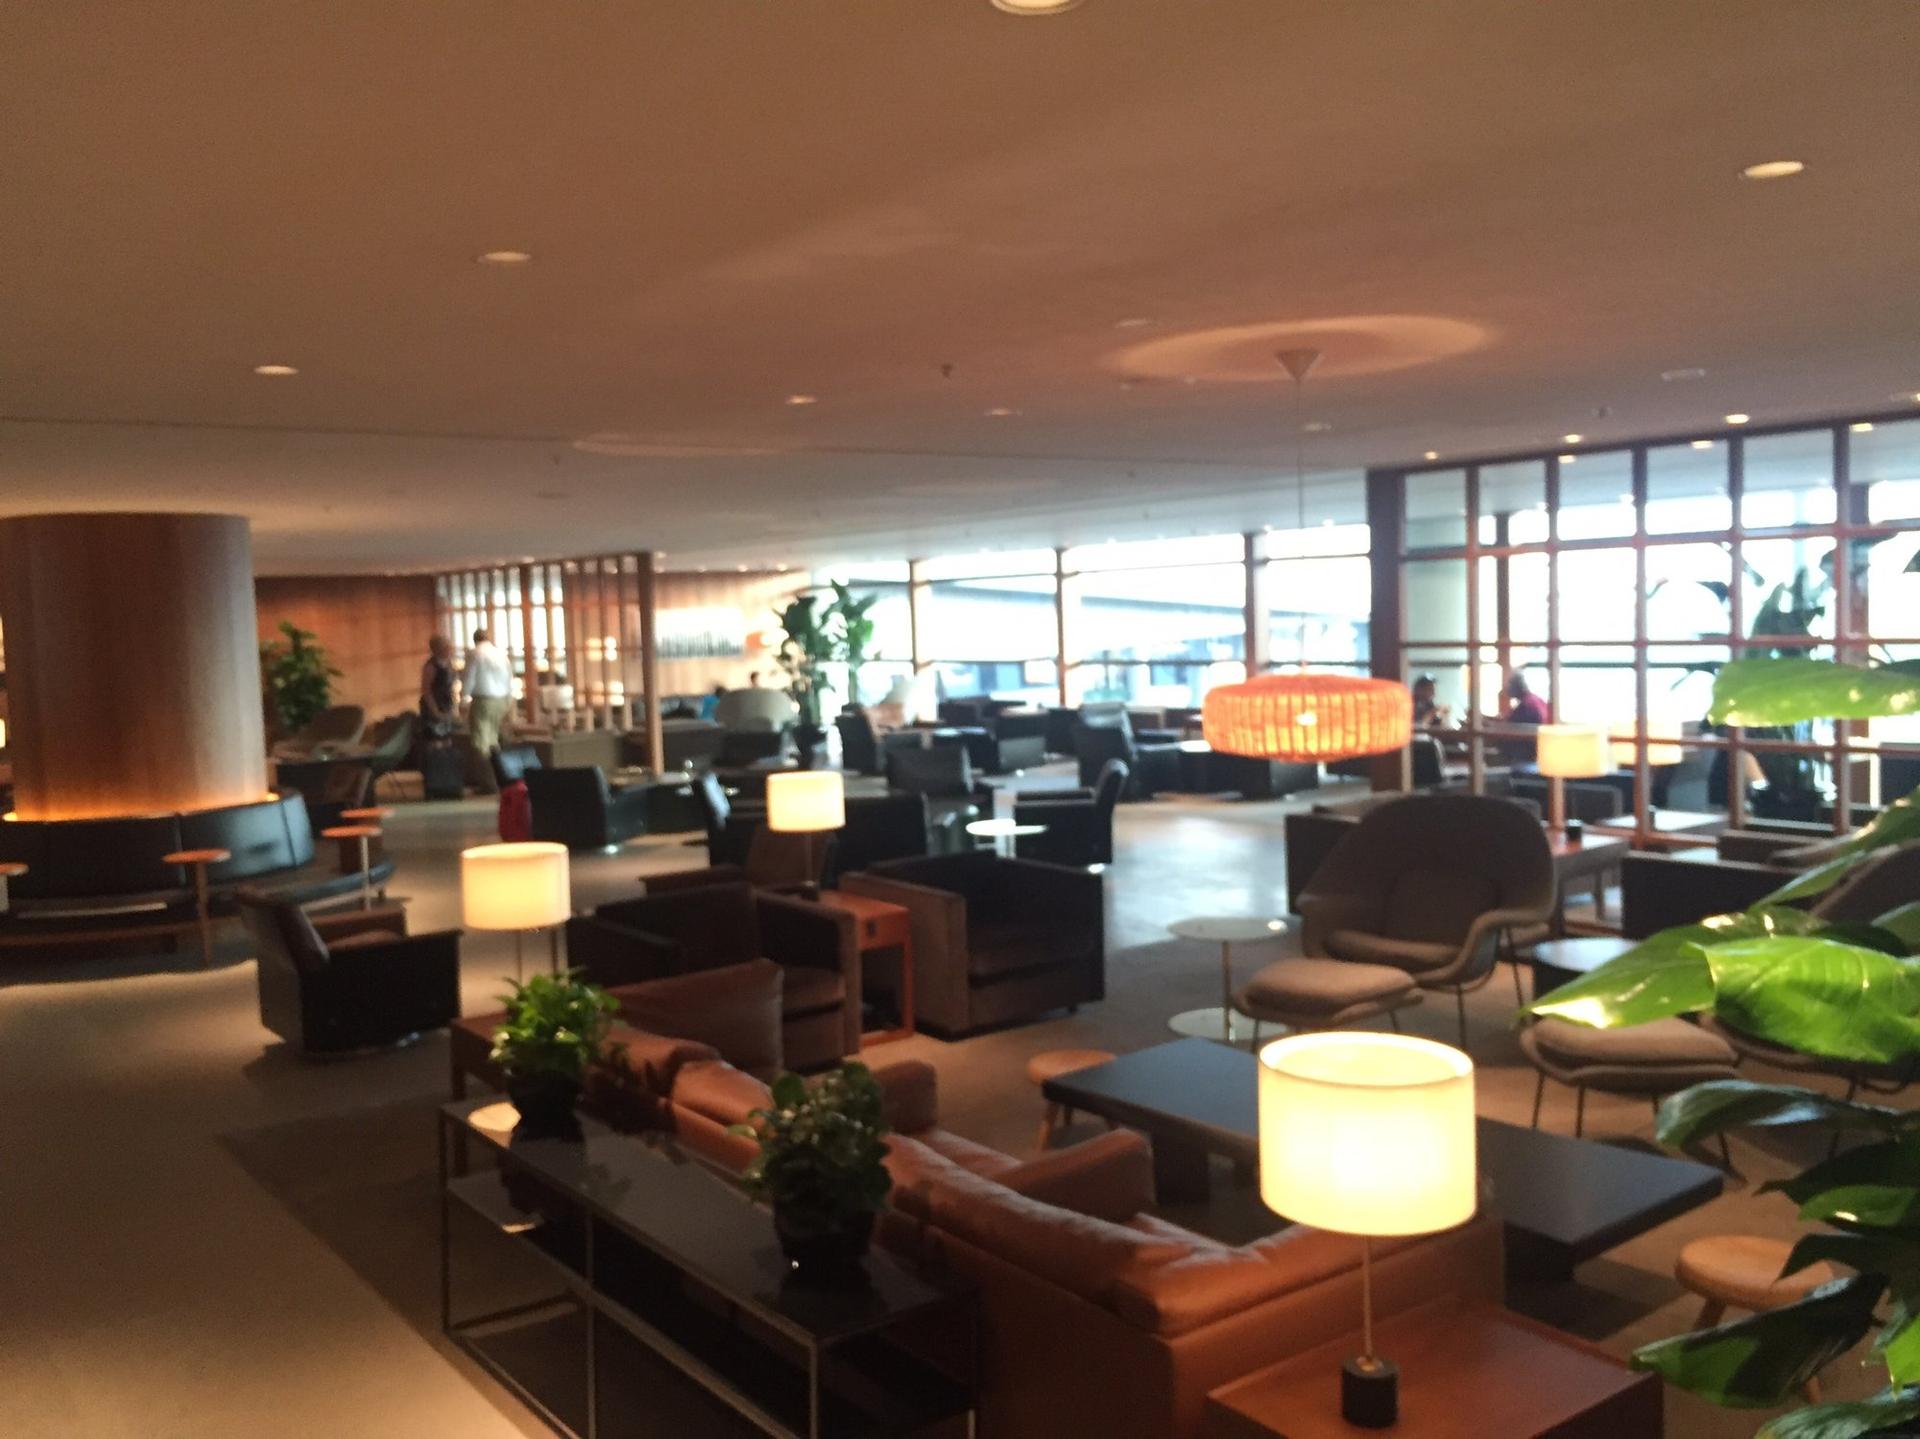 Cathay Pacific The Pier Business Class Lounge image 13 of 61